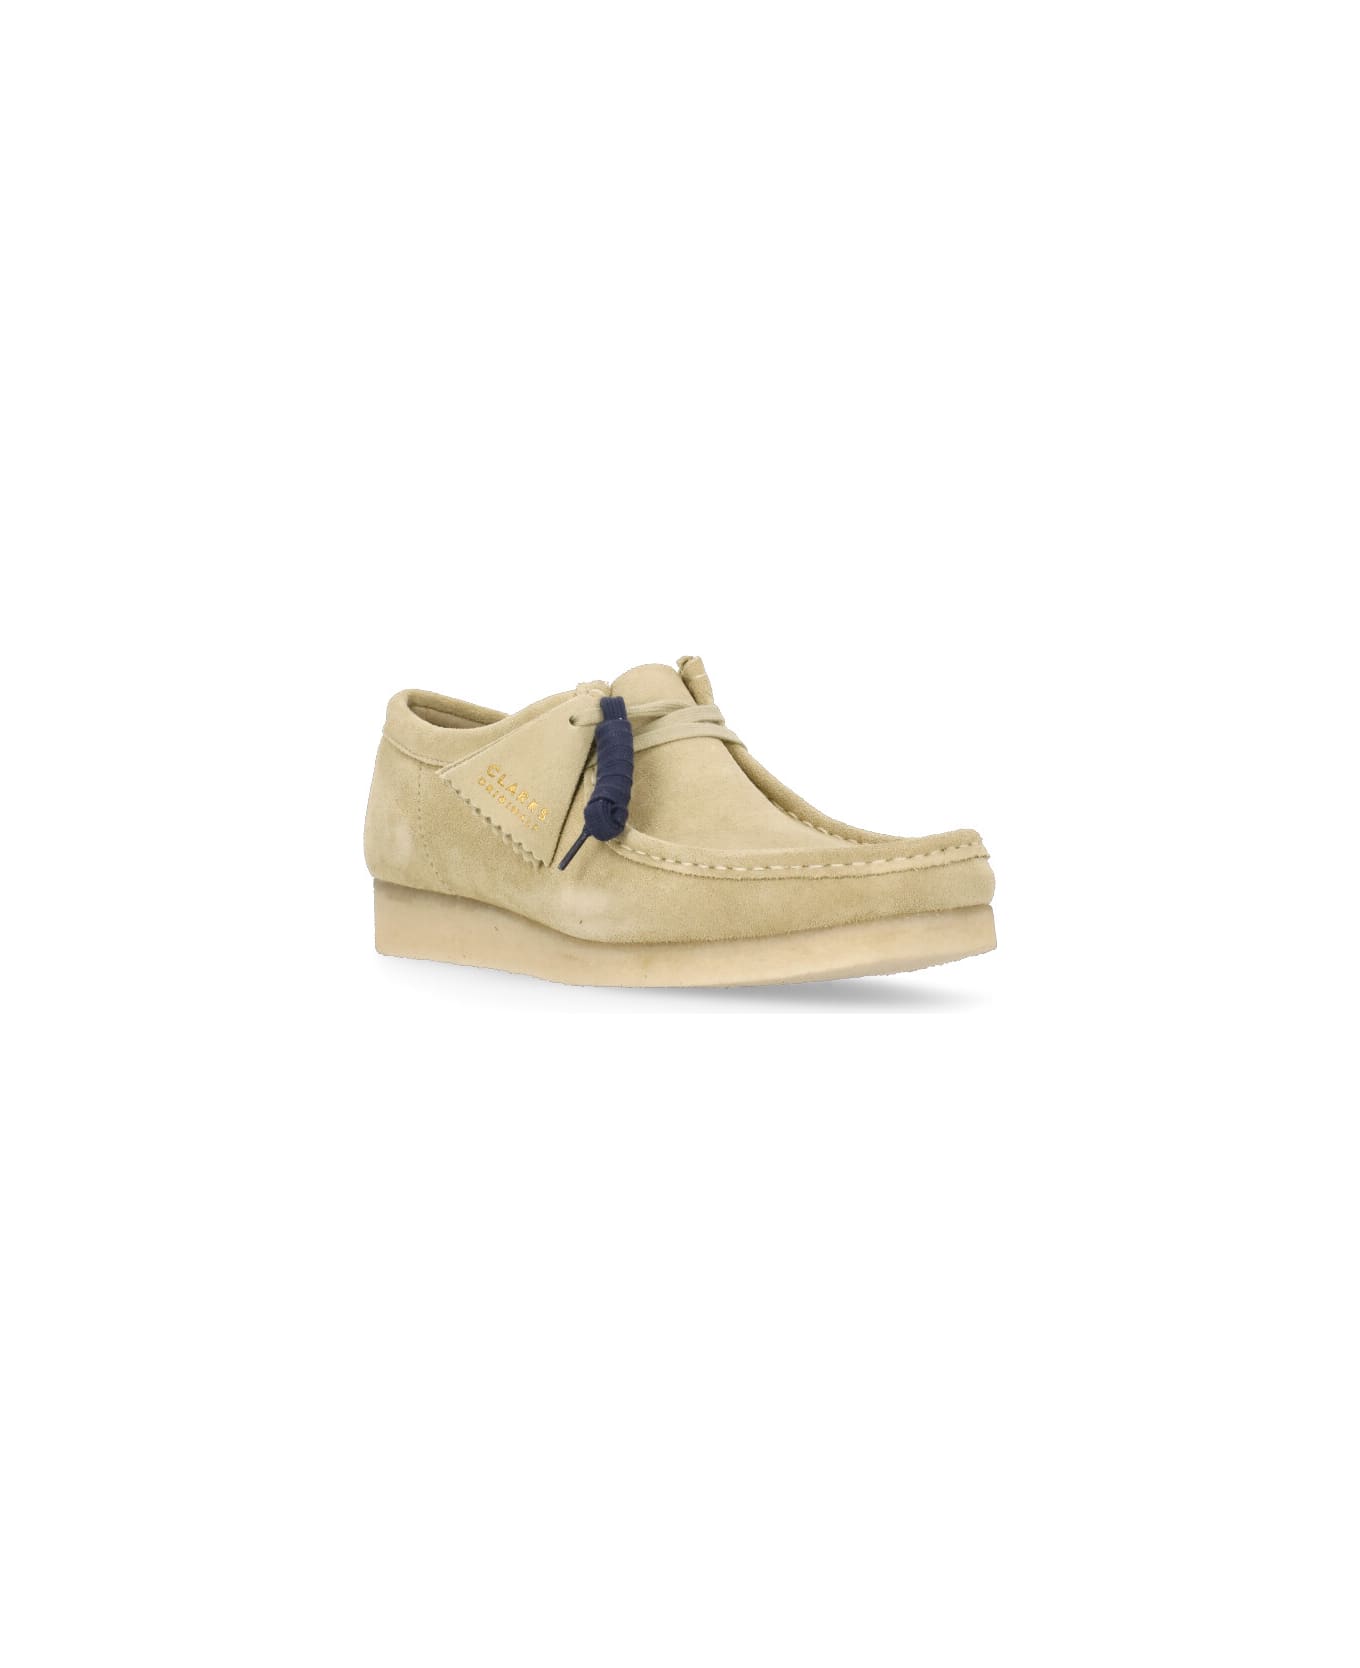 Clarks Wallabee Loafers - Green